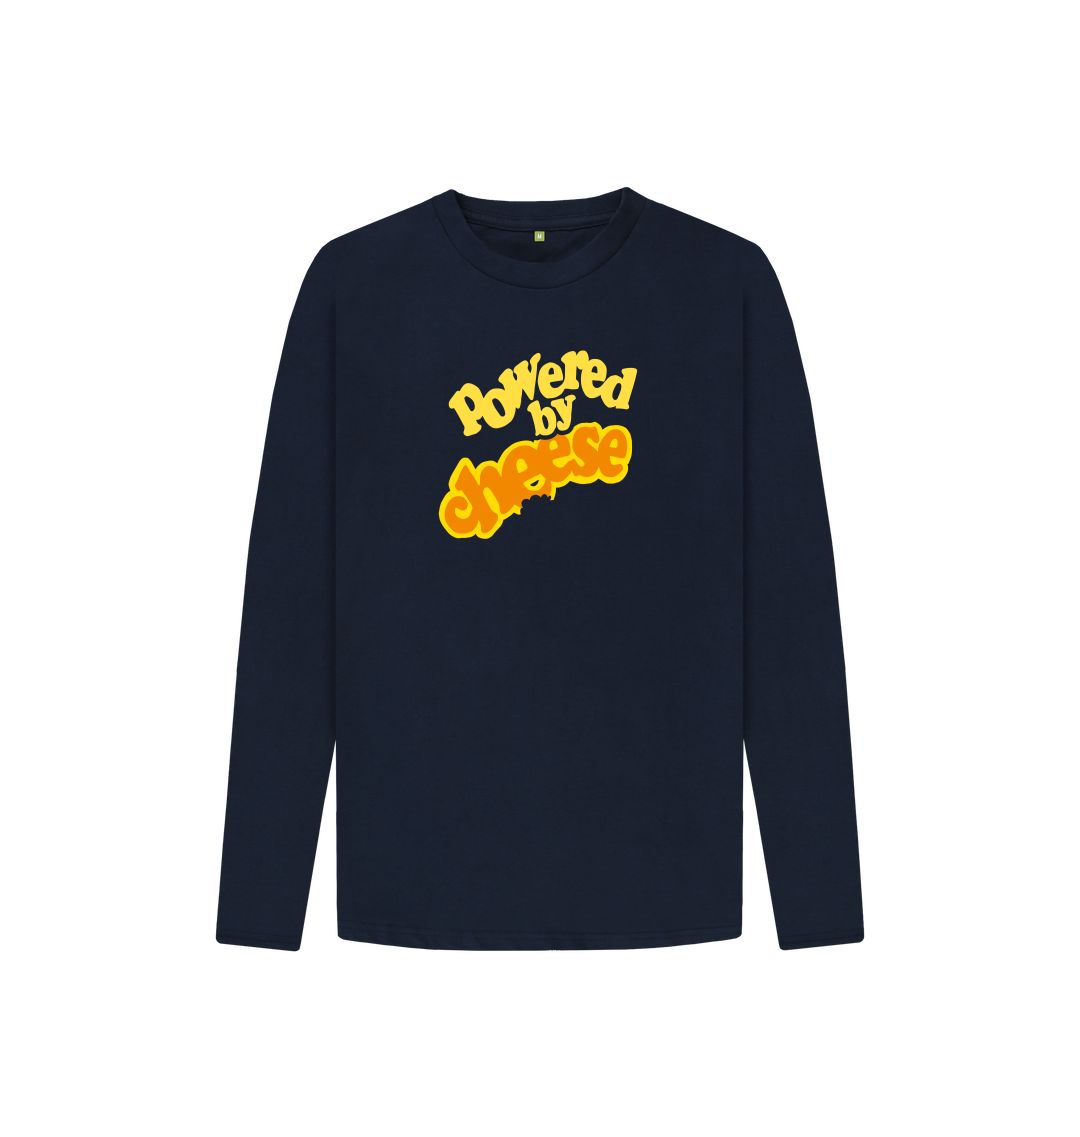 Navy Blue Kid's Long Sleeve Powered by Cheese Tee